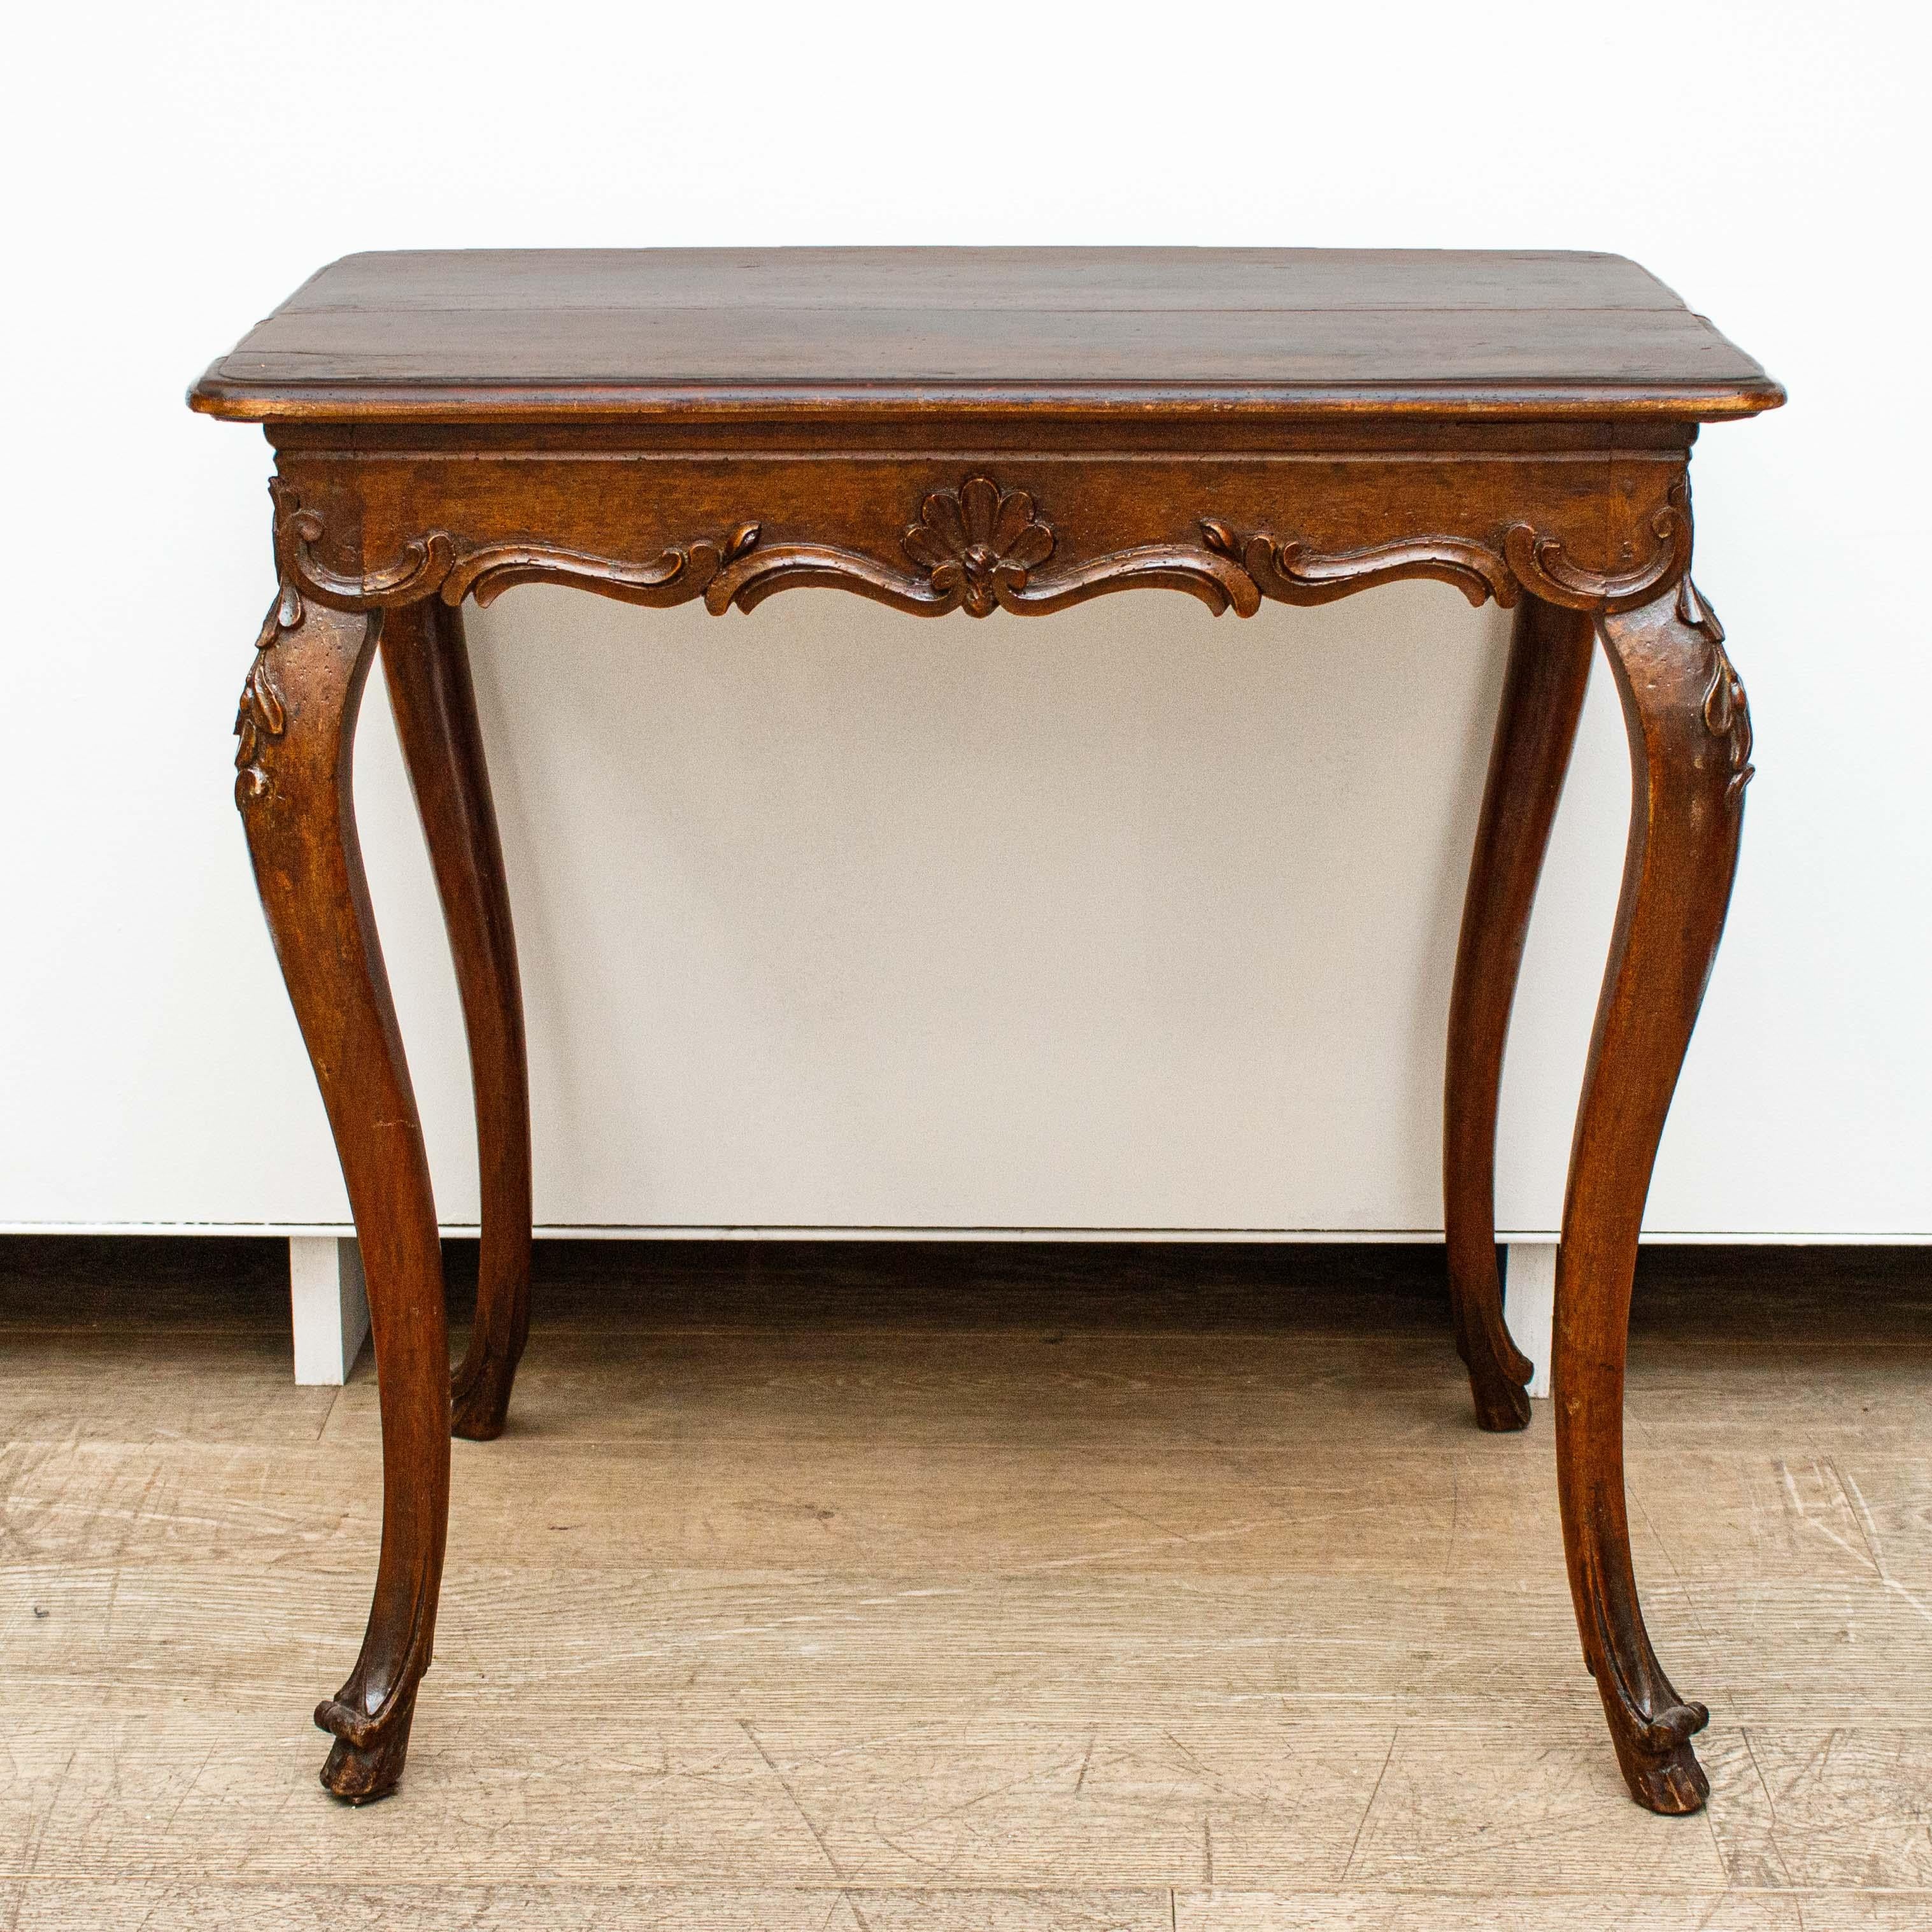 Carved 18th Century, Venice, Walnut Wood Table For Sale